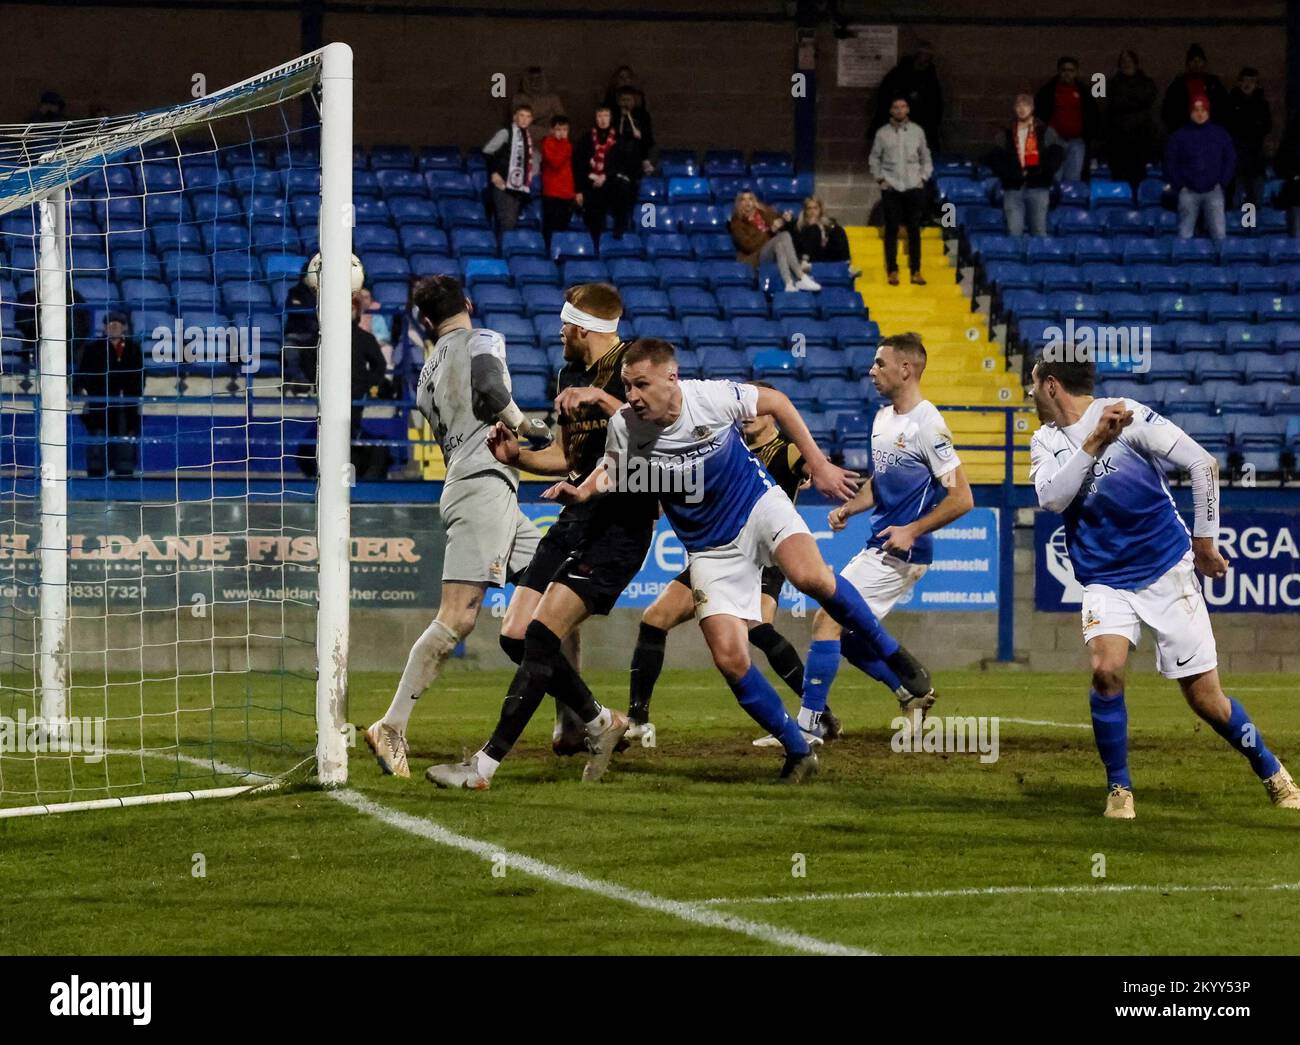 Mourneview Park, Lurgan, County Armagh, Northern Ireland, UK. 2 Dec 2022. Danske Bank Premiership – Glenavon v Larne Action from tonight's game at Mourneview Park (Glenavon in blue). An own goal from Gleavon's Sean Ward (right) was the difference between the teams. Credit: CAZIMB/Alamy Live News. Stock Photo